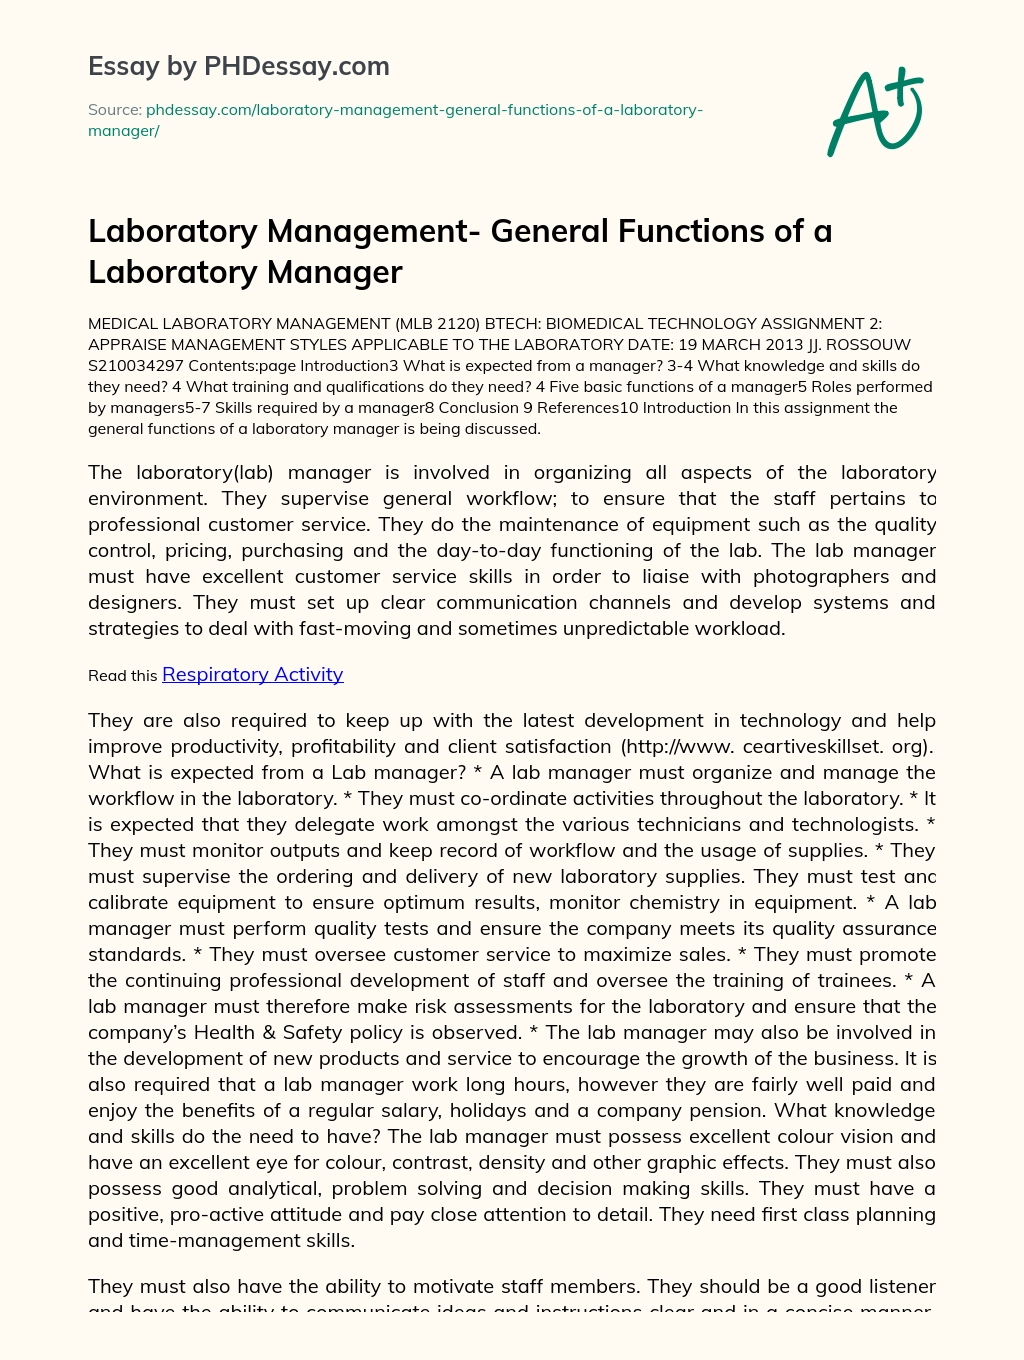 Laboratory Management- General Functions of a Laboratory Manager essay